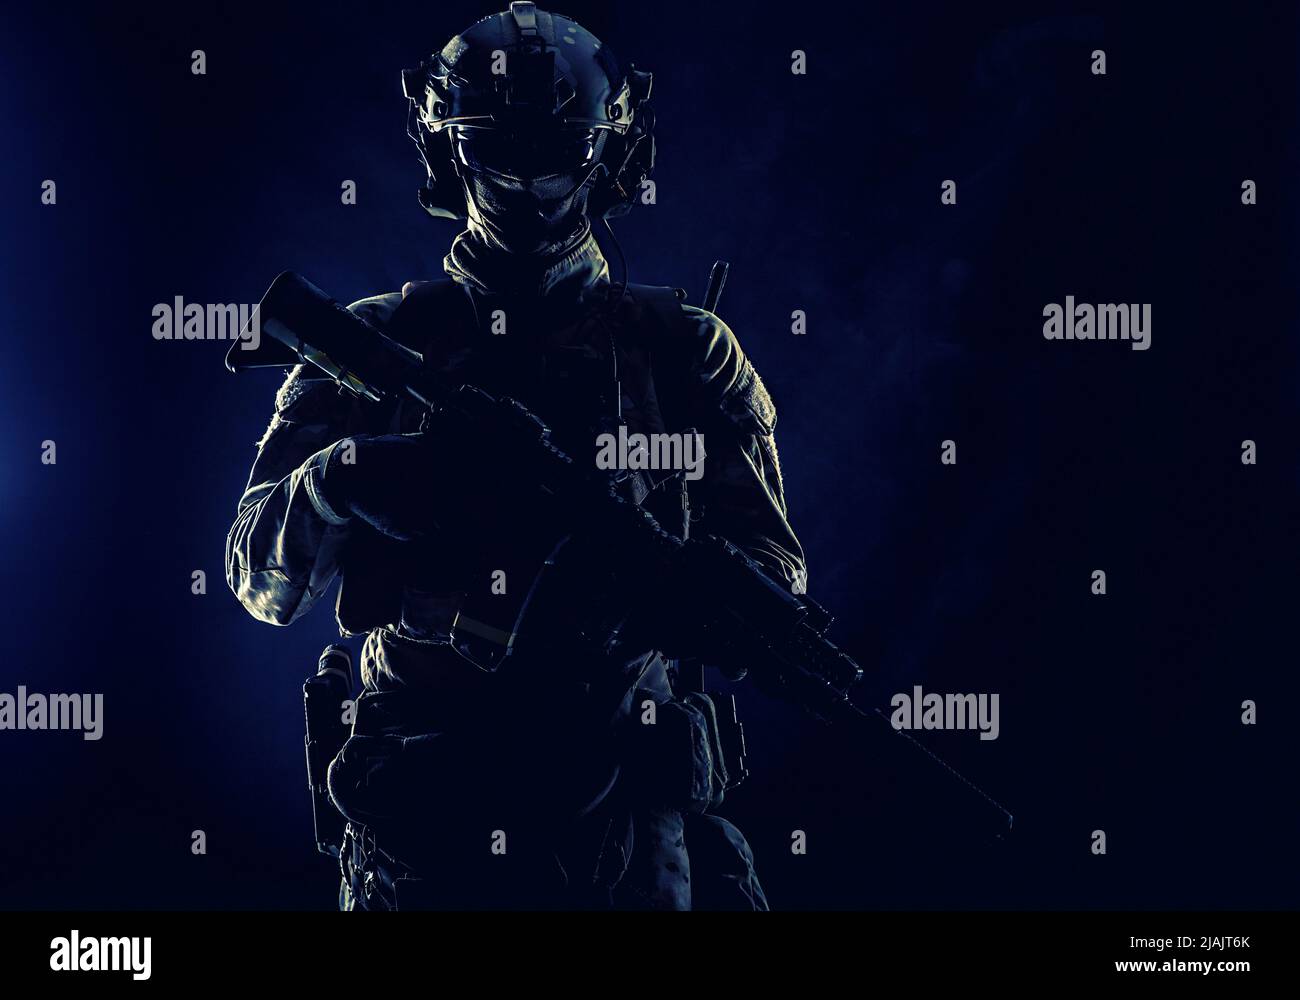 Low key studio portrait of an Army special forces elite soldier standing with assault rifle in darkness. Stock Photo